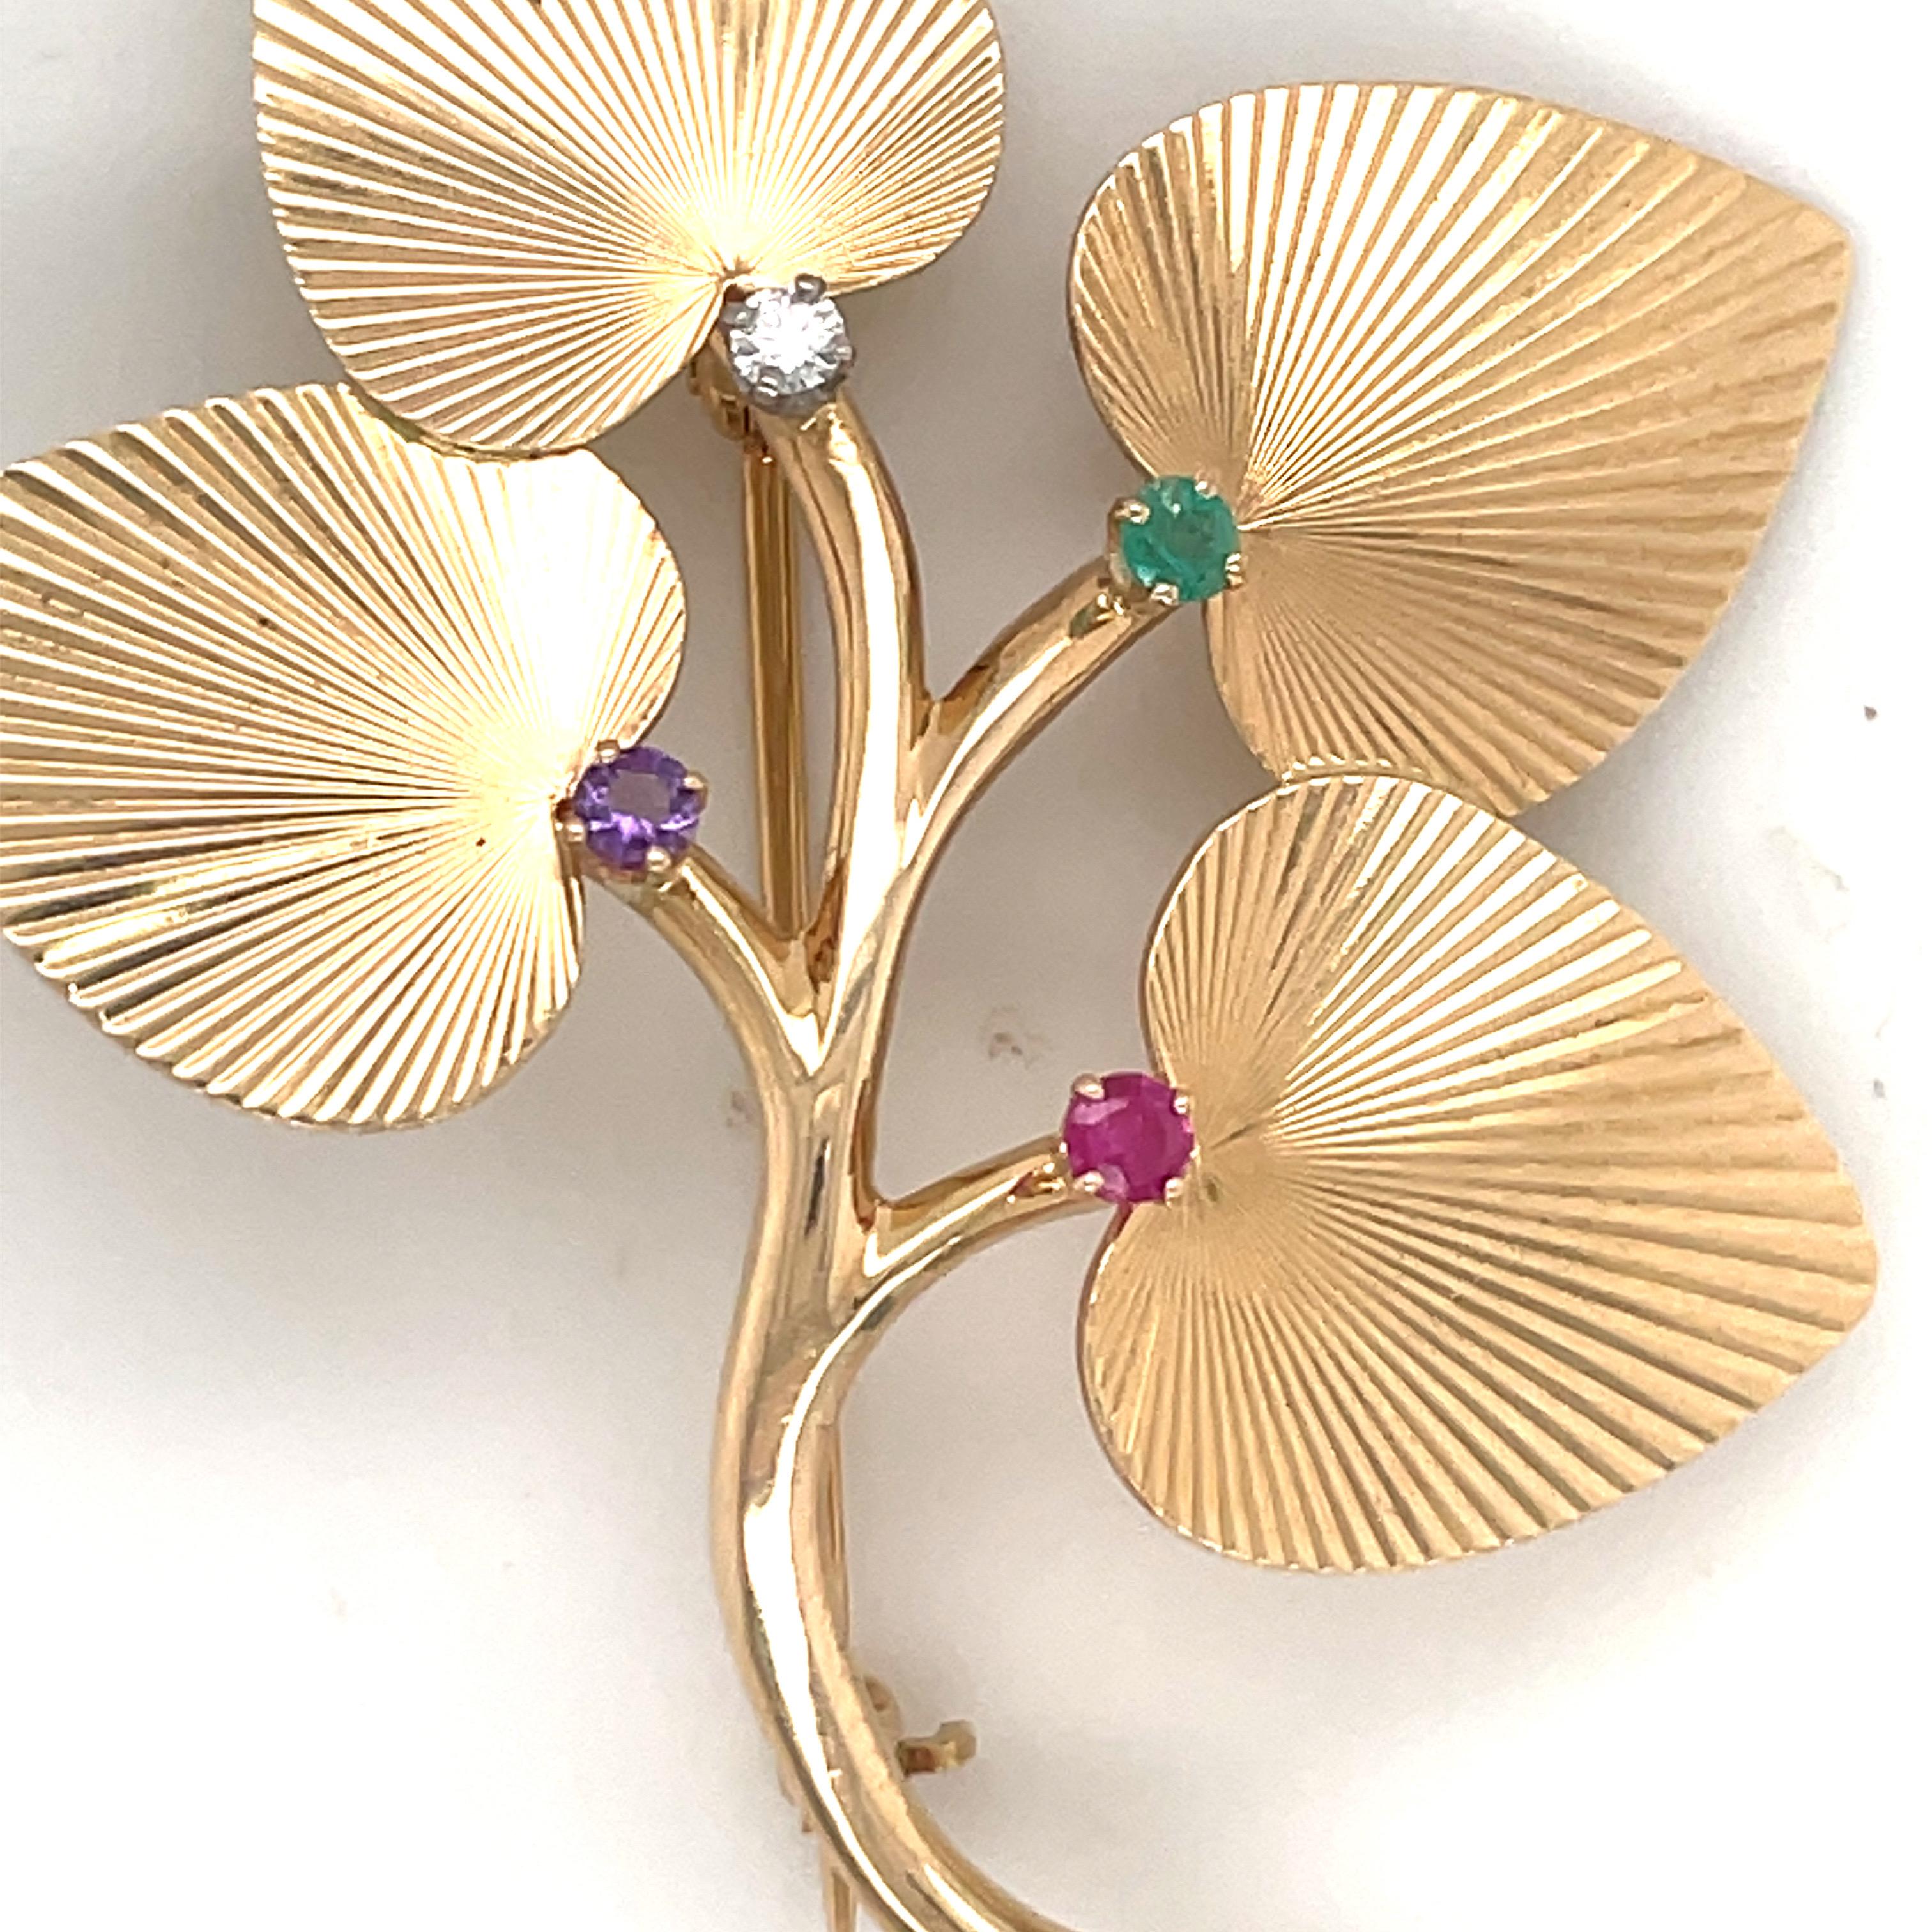 Stamped Tiffany & Co this floral pin featuring one Diamond, Emerald, Ruby & Amethyst crafted in 14 Karat Yellow Gold.
Matching Earrings. 